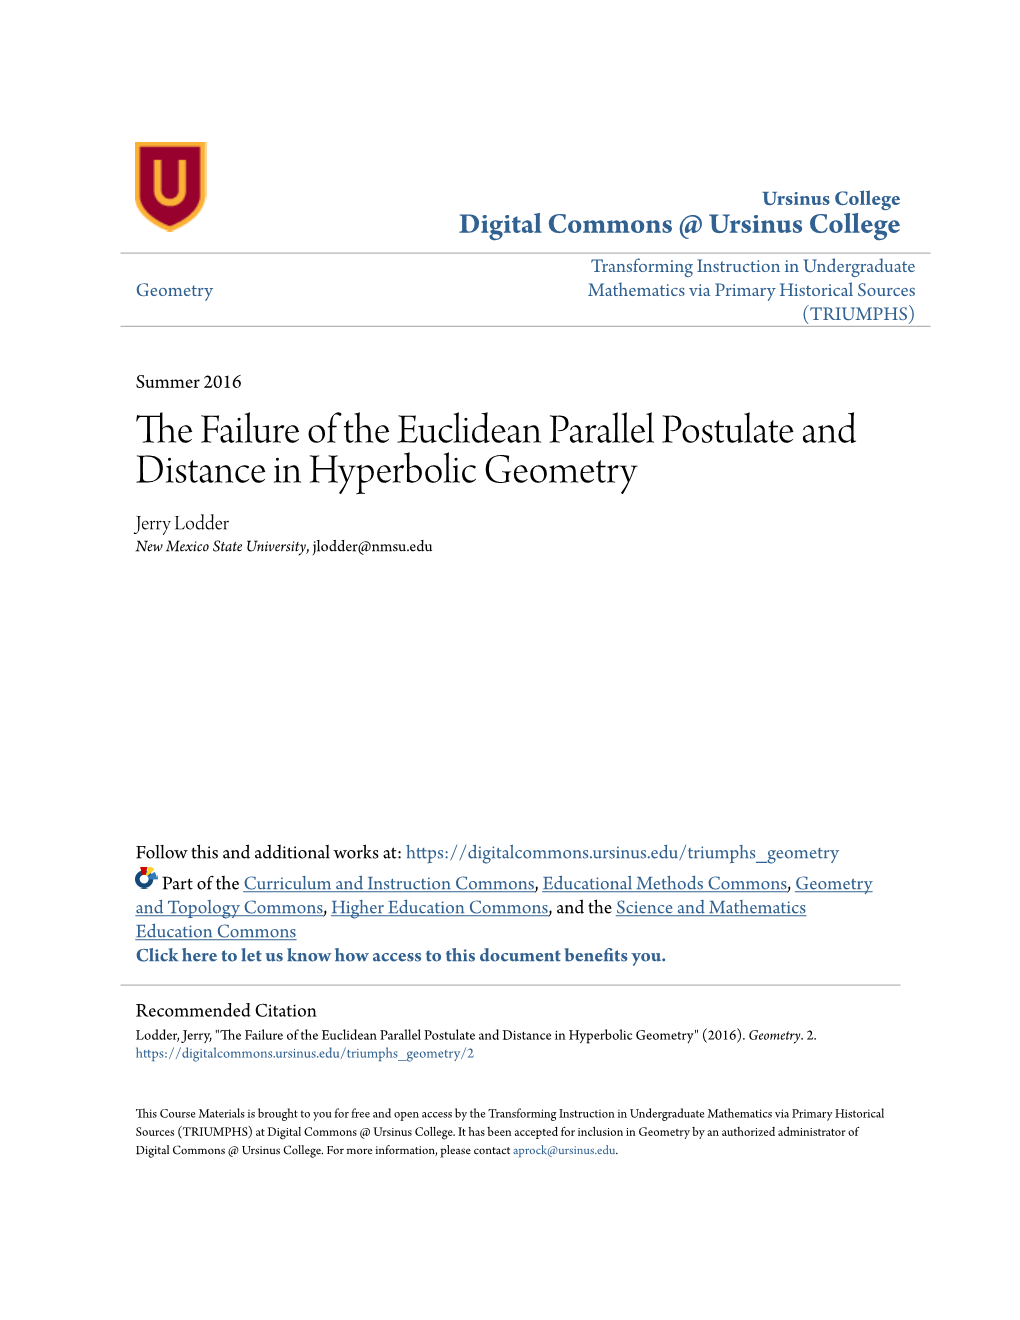 The Failure of the Euclidean Parallel Postulate and Distance in Hyperbolic Geometry